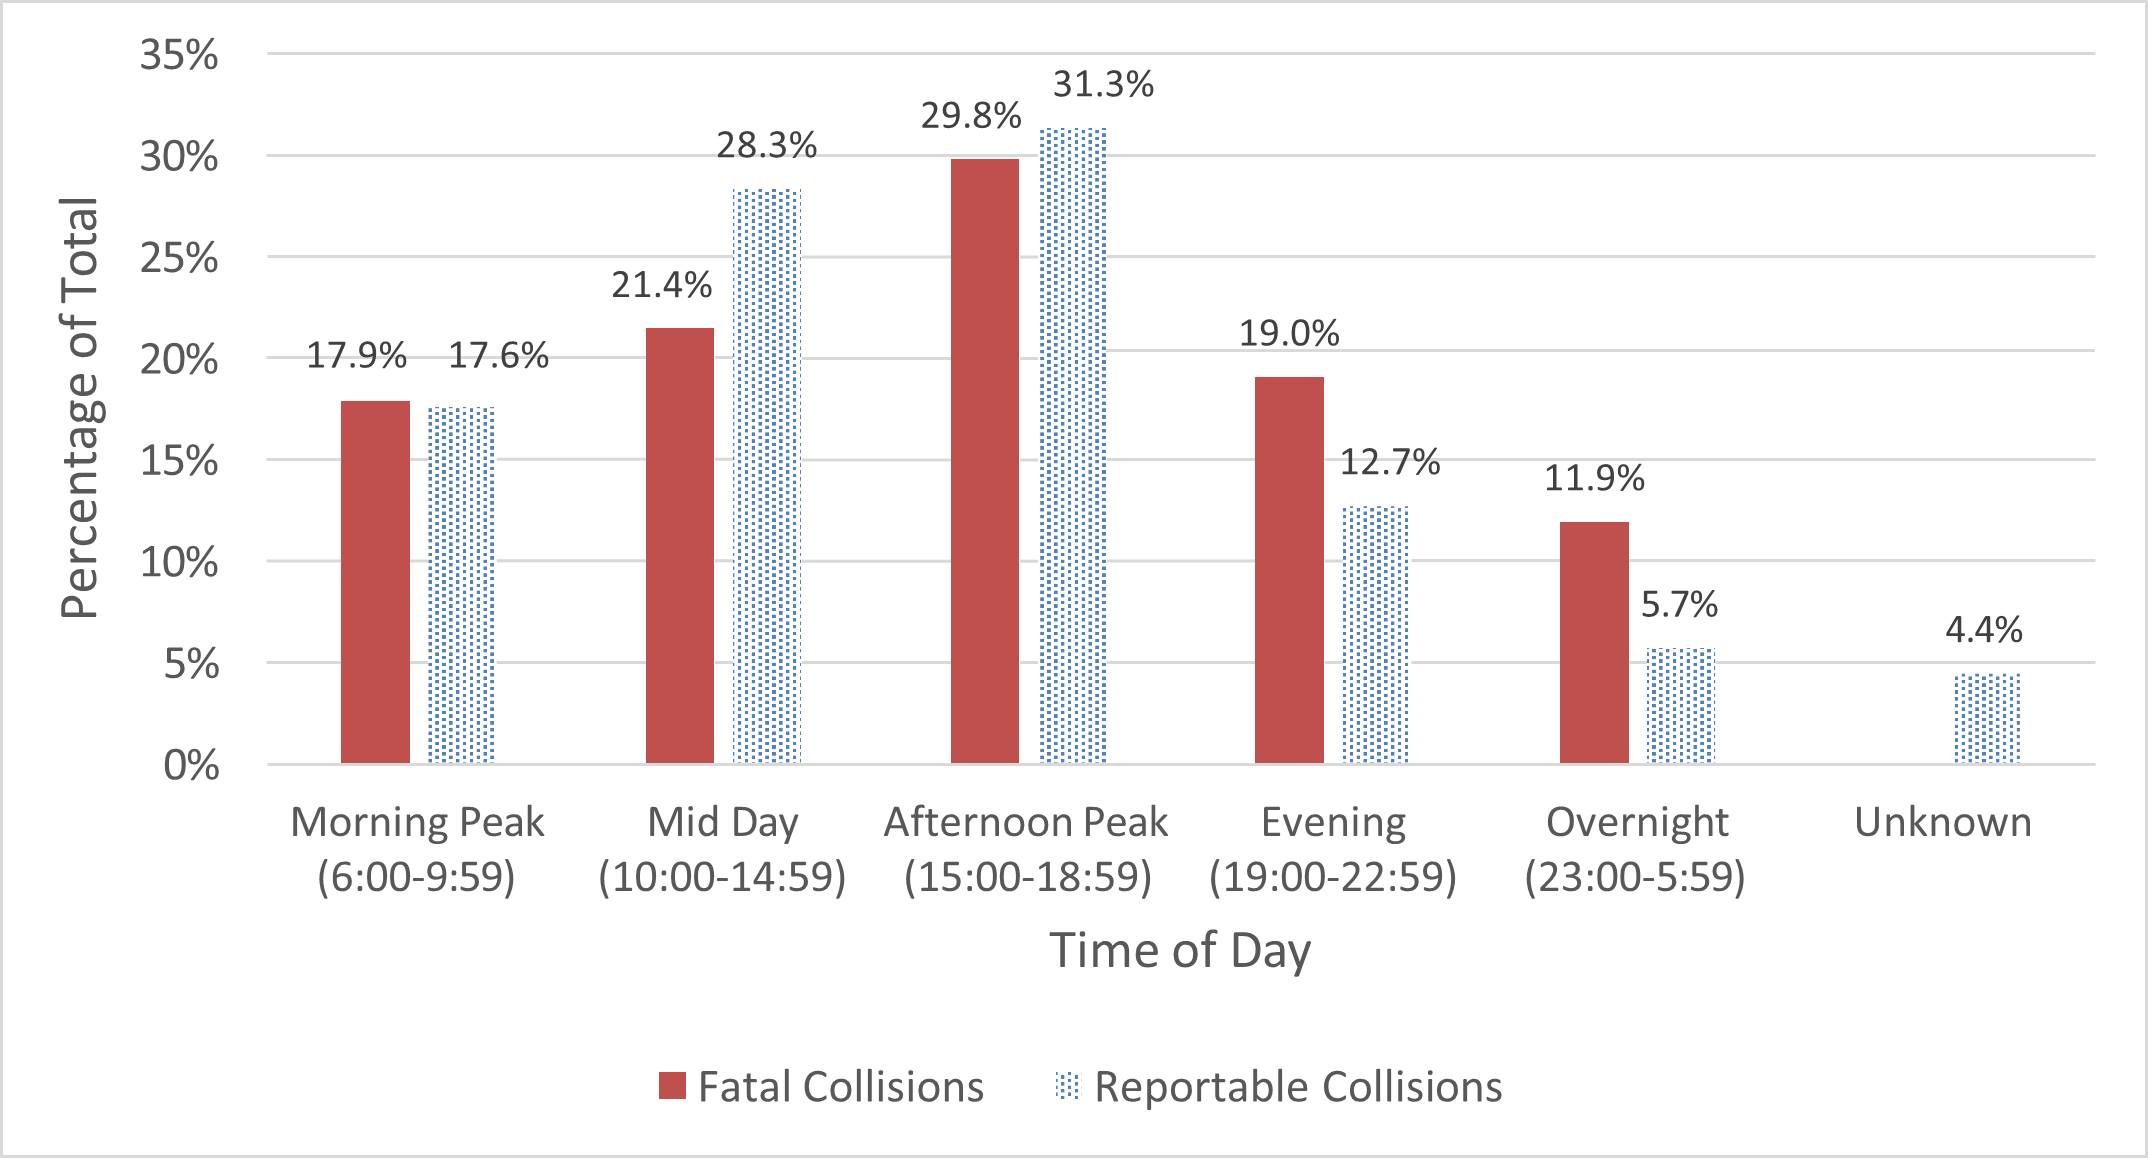 Figure Eight demonstrates the number of fatal collisions versus reportable collisions by time of day as percentages.